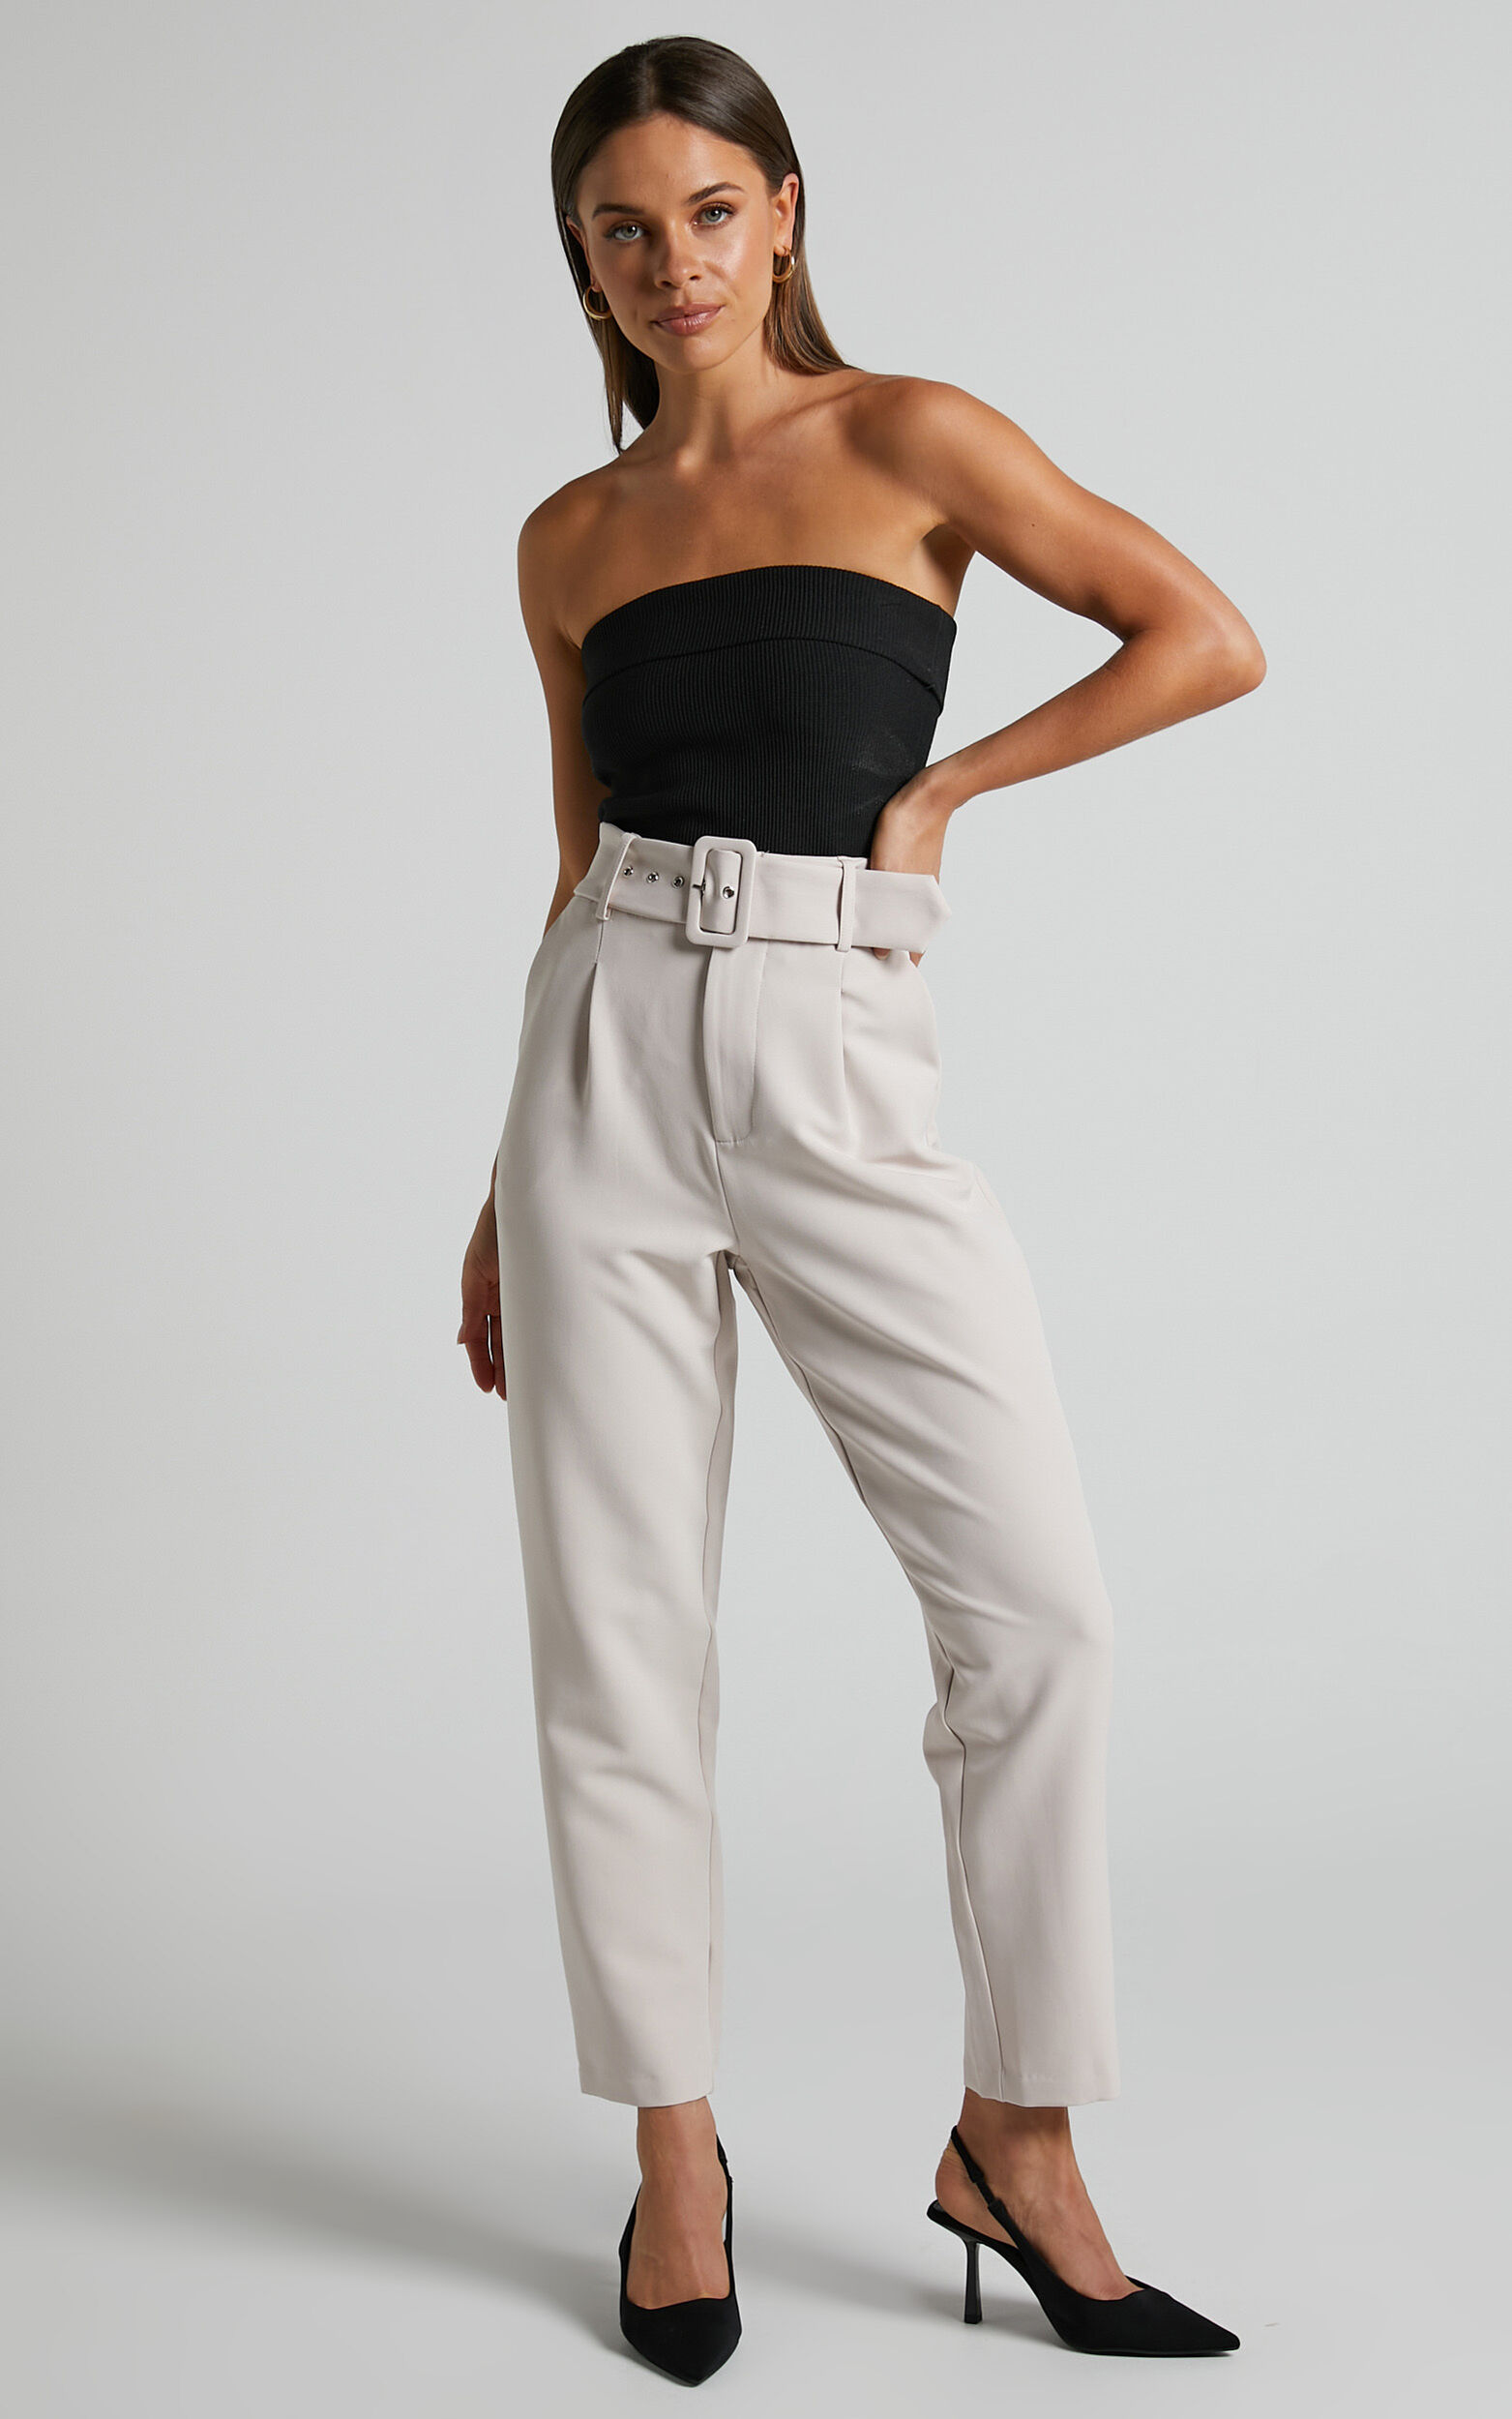 https://images.showpo.com/dw/image/v2/BDPQ_PRD/on/demandware.static/-/Sites-sp-master-catalog/default/dwcd950dad/images/milica-trousers-belted-high-waisted-trousers-SB23010020/Milica_Trousers_-_Belted_High_Waisted_Trousers_in_Beige_3.jpg?sw=1563&sh=2500